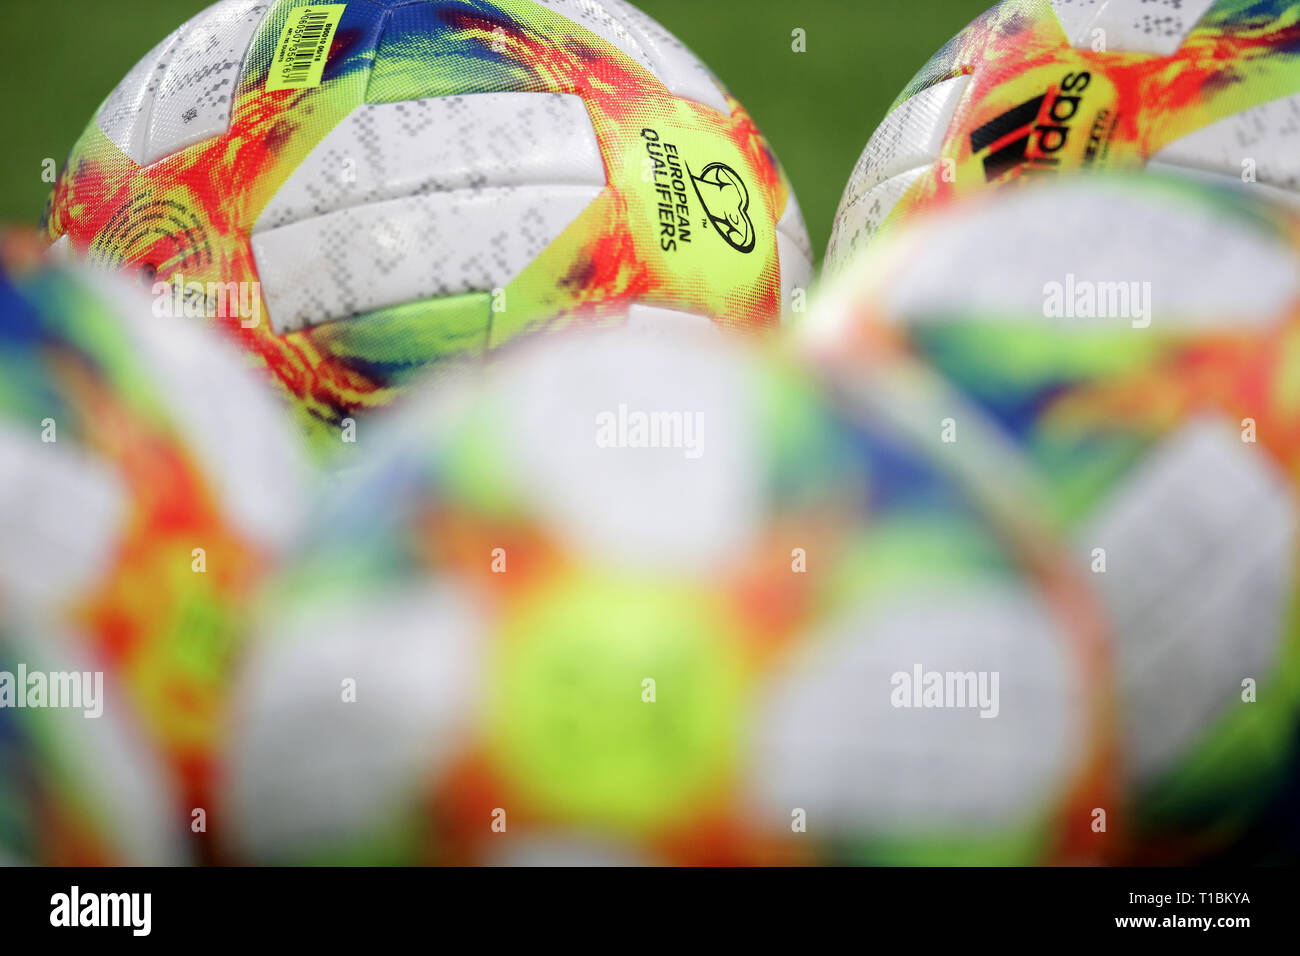 A detail view of European Qualifier adidas footballs during the UEFA Euro 2020 Qualifying, Group I match at the Astana Arena. Stock Photo